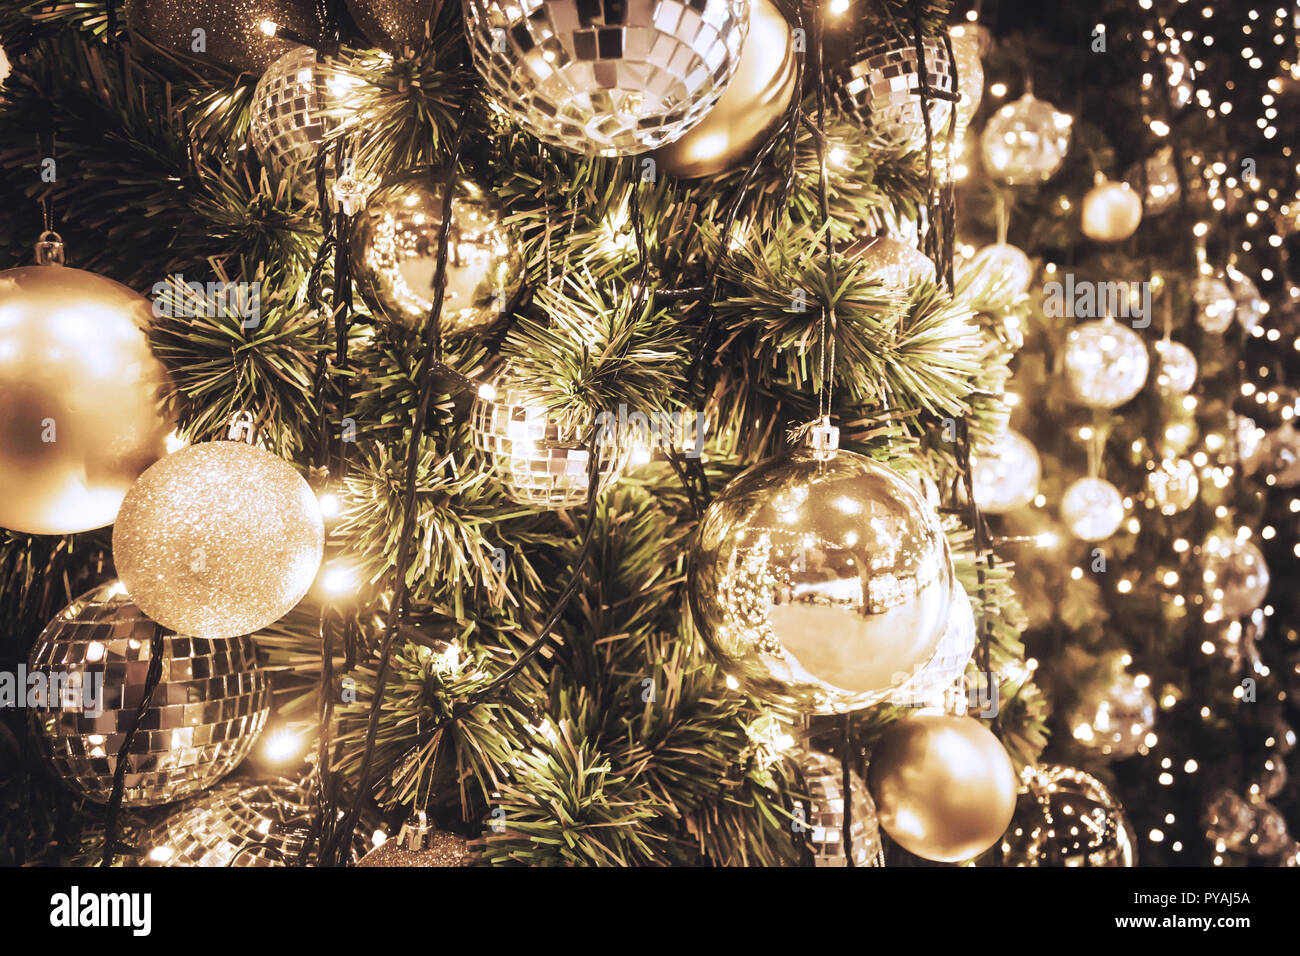 Christmas tree with gold ball and bokeh lights background. Xmas abstract close up with glowing decorations outdoors. Stock Photo